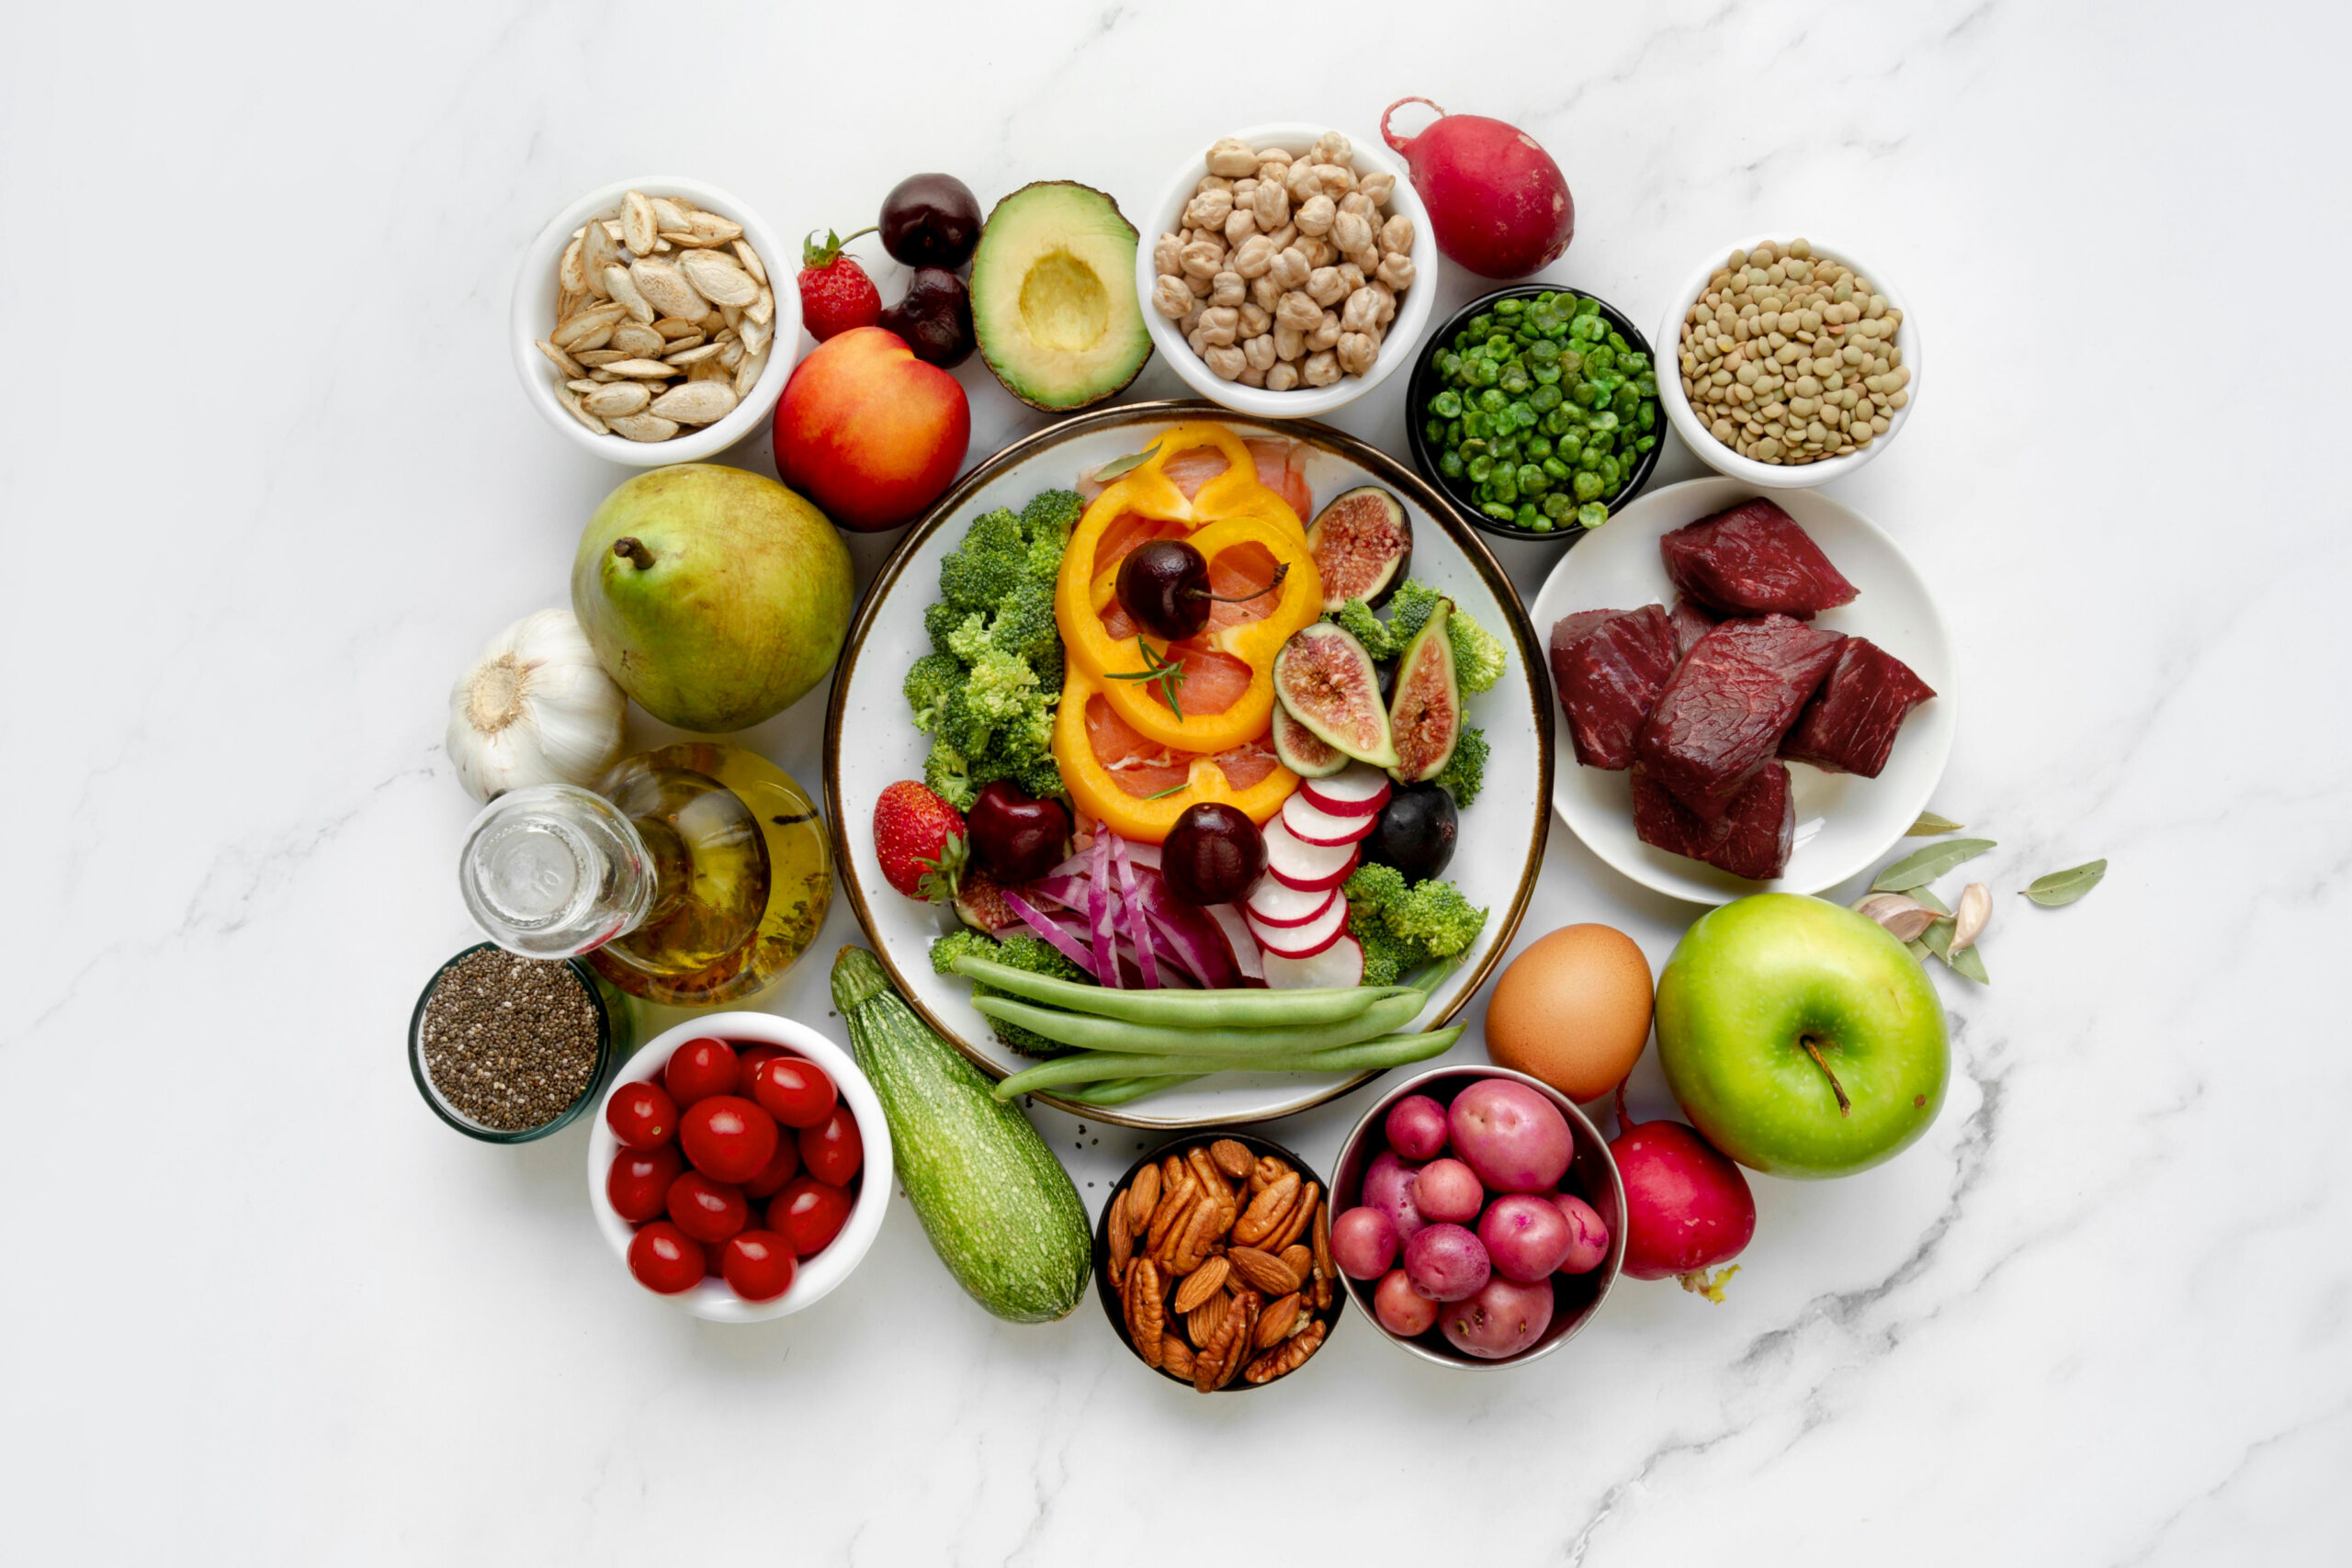 What Is Health Nutrition?